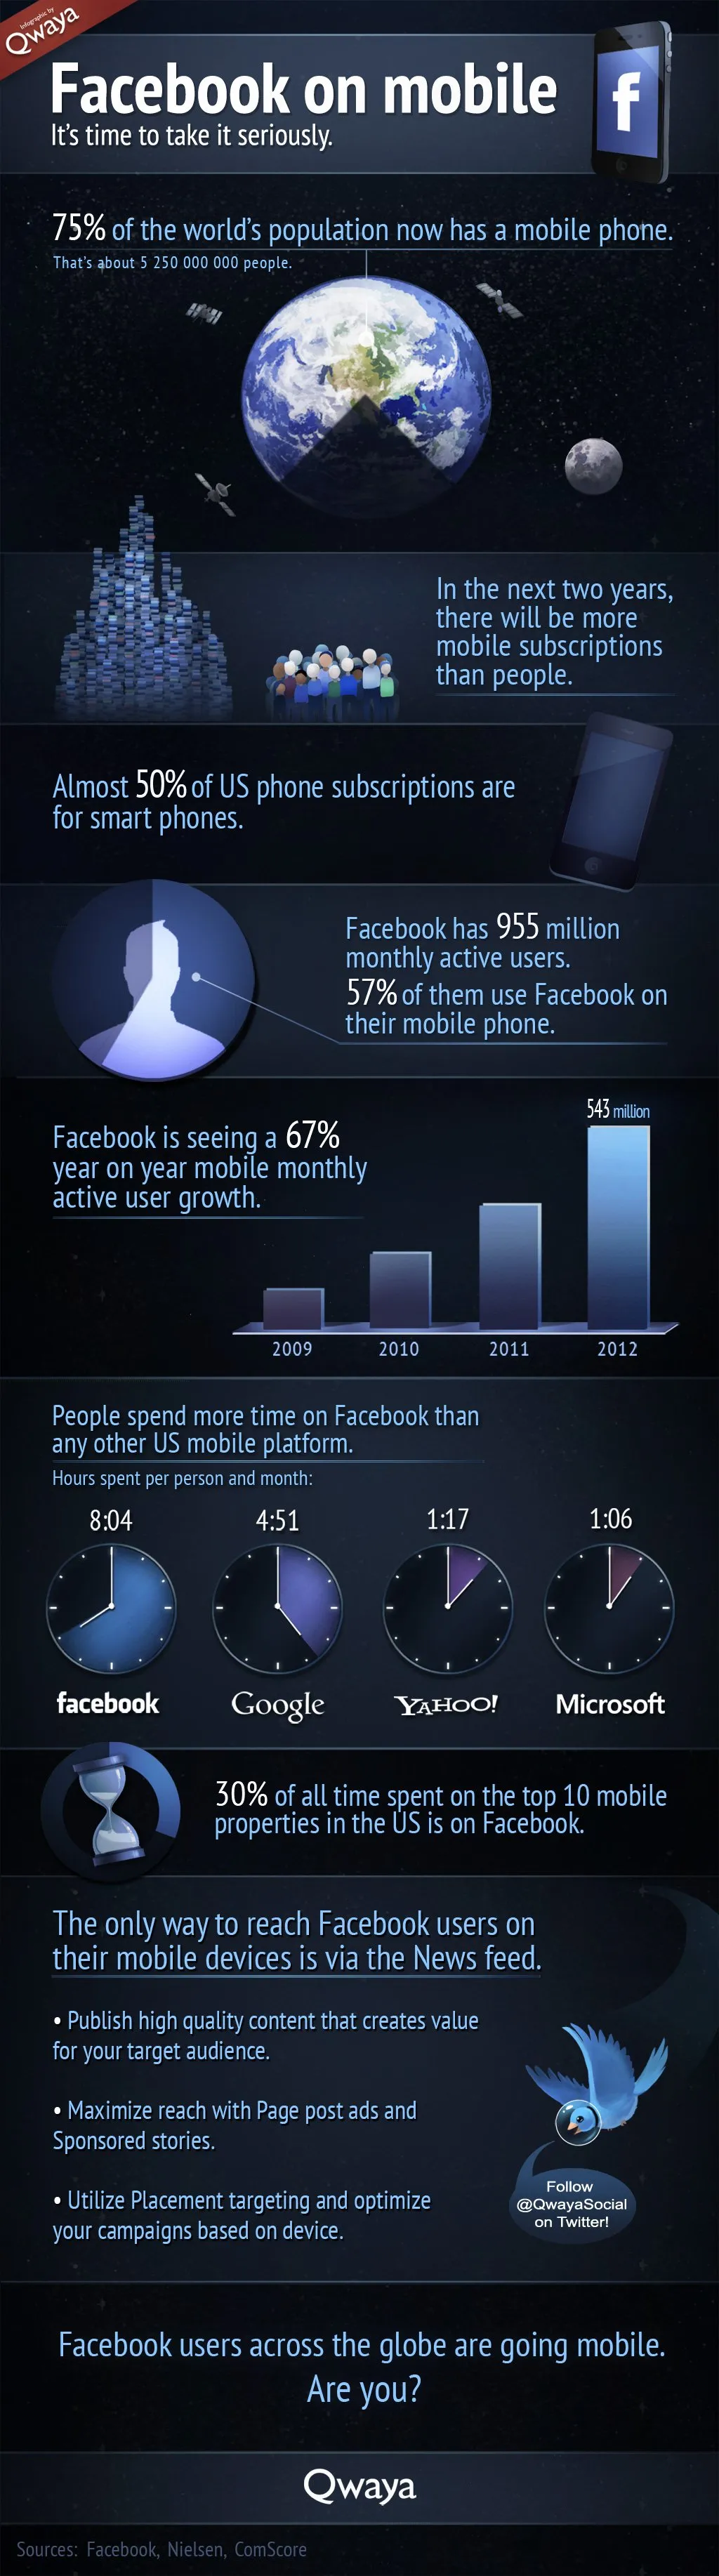 Facebook on mobile [ Infographic ]